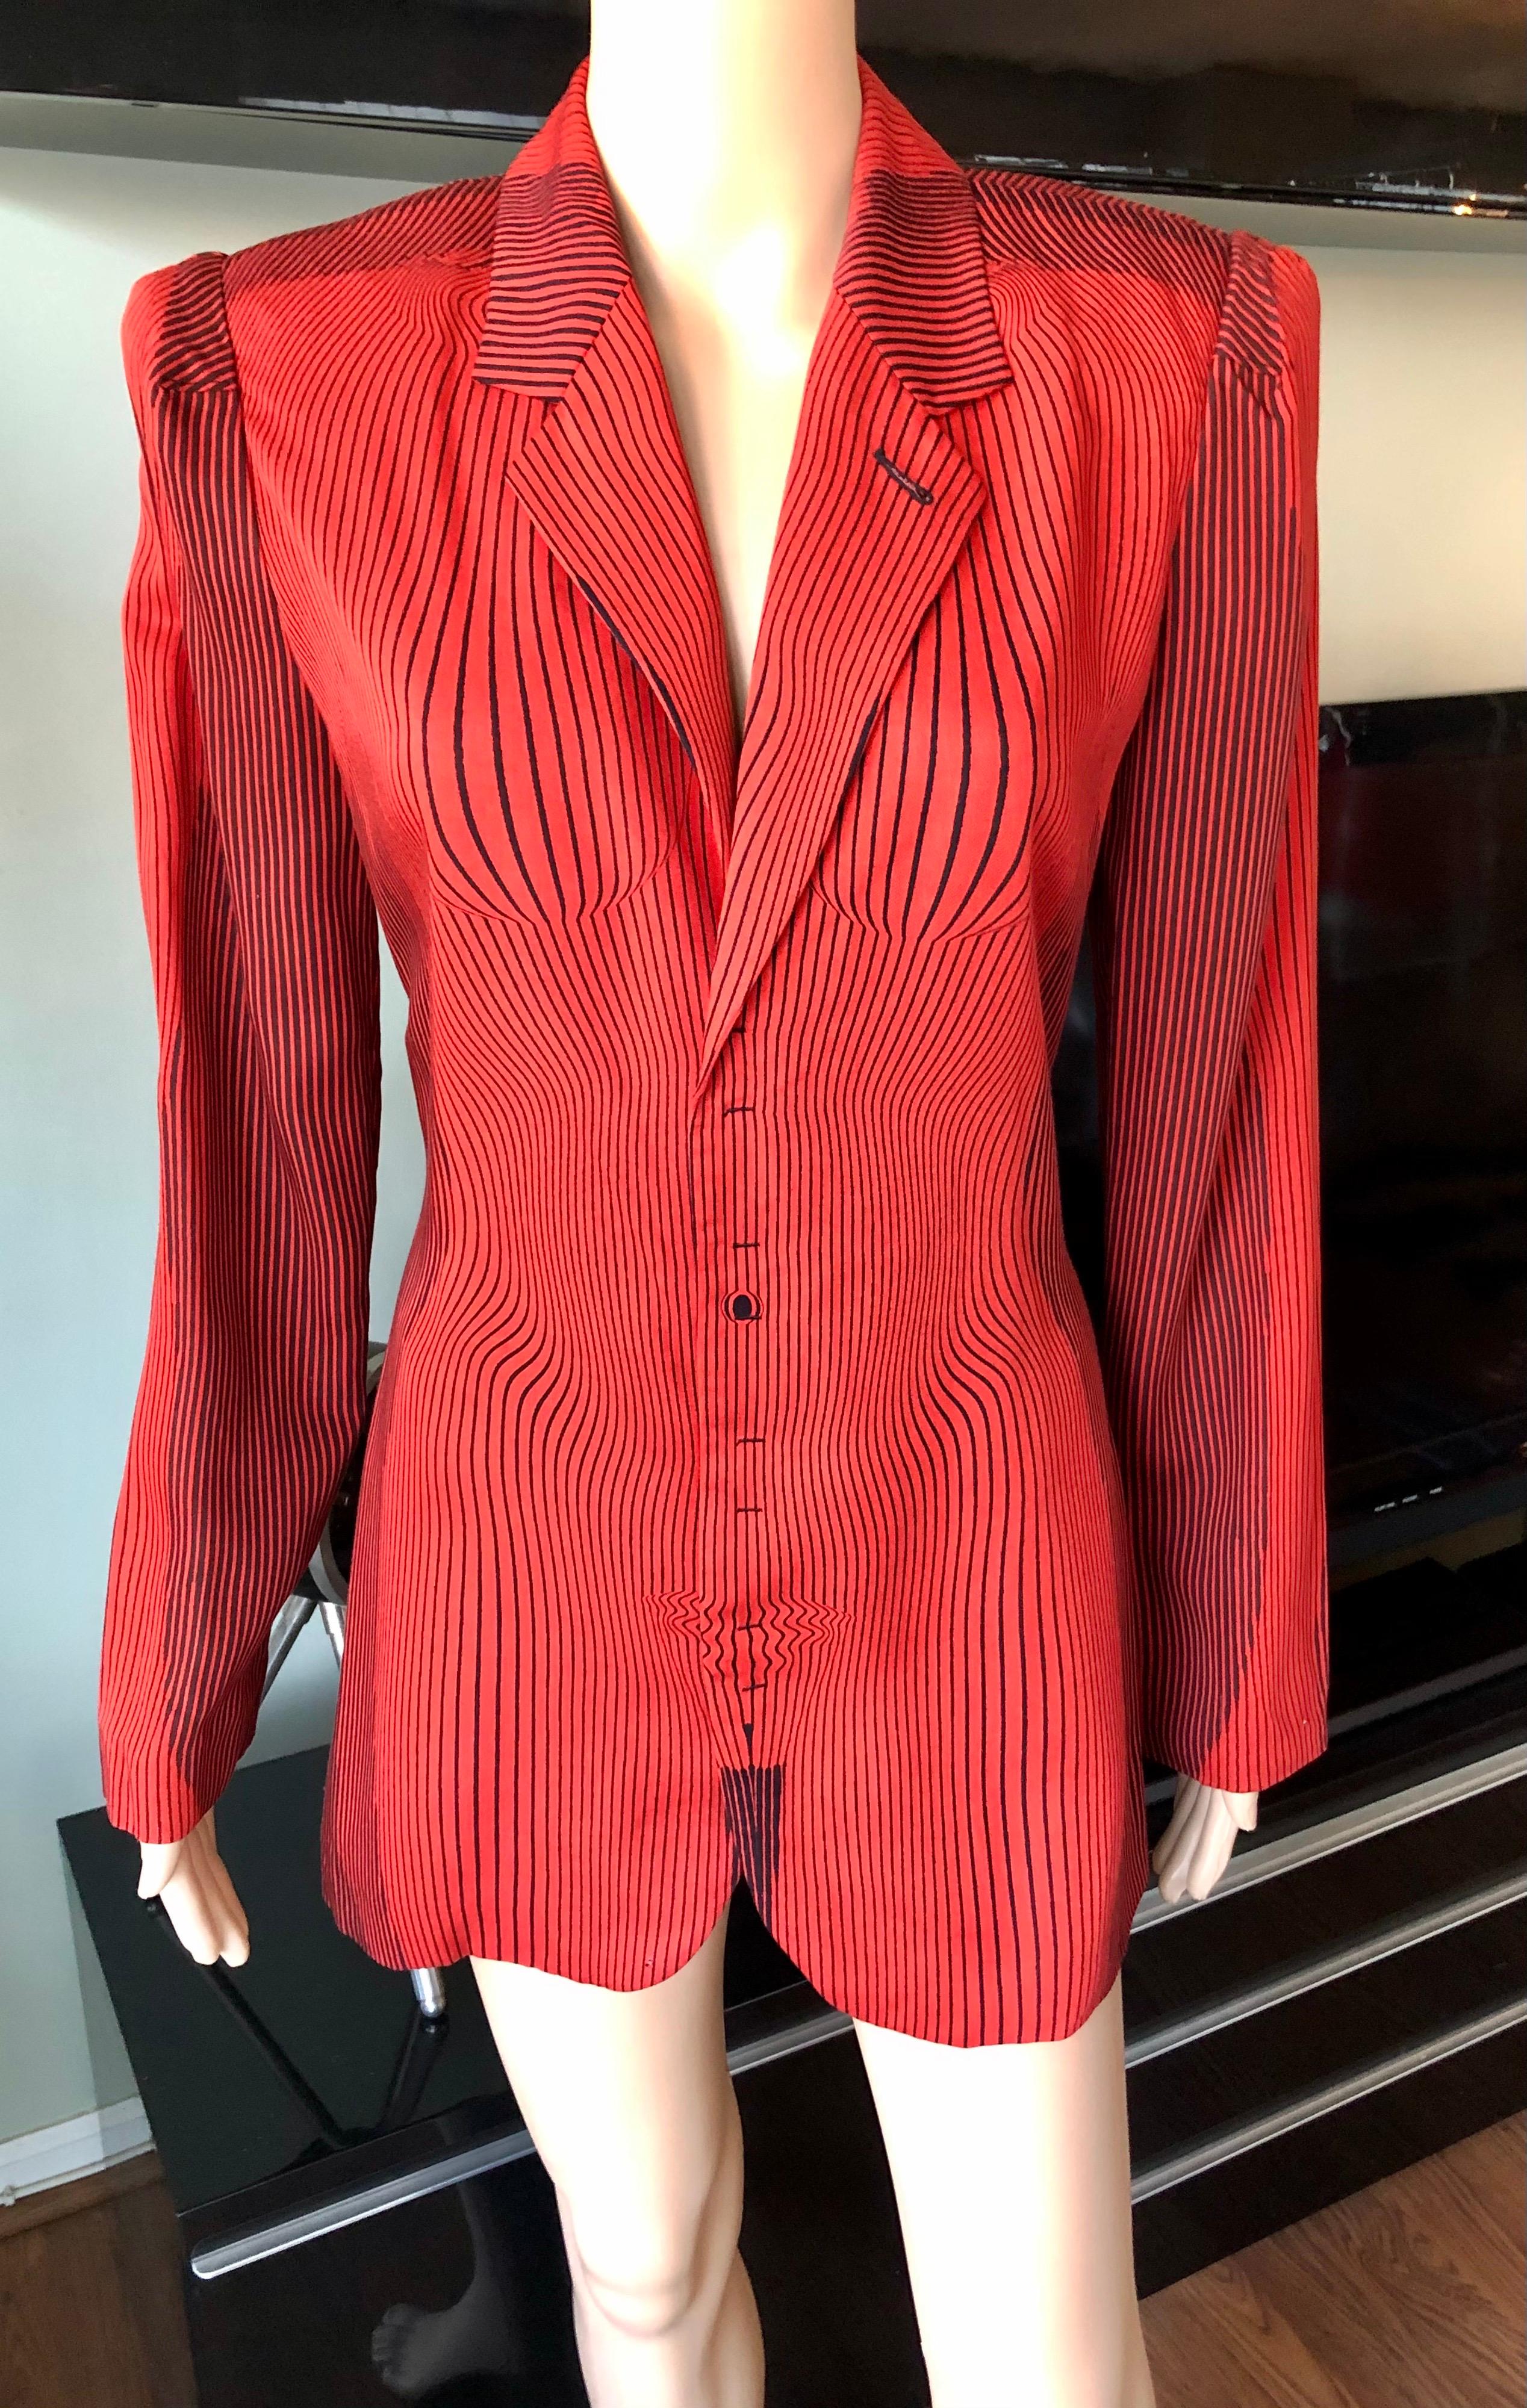 Jean Paul Gaultier S/S 1996 Vintage Cyberbaba Optical Illusion Jacket Blazer Top For Sale 3